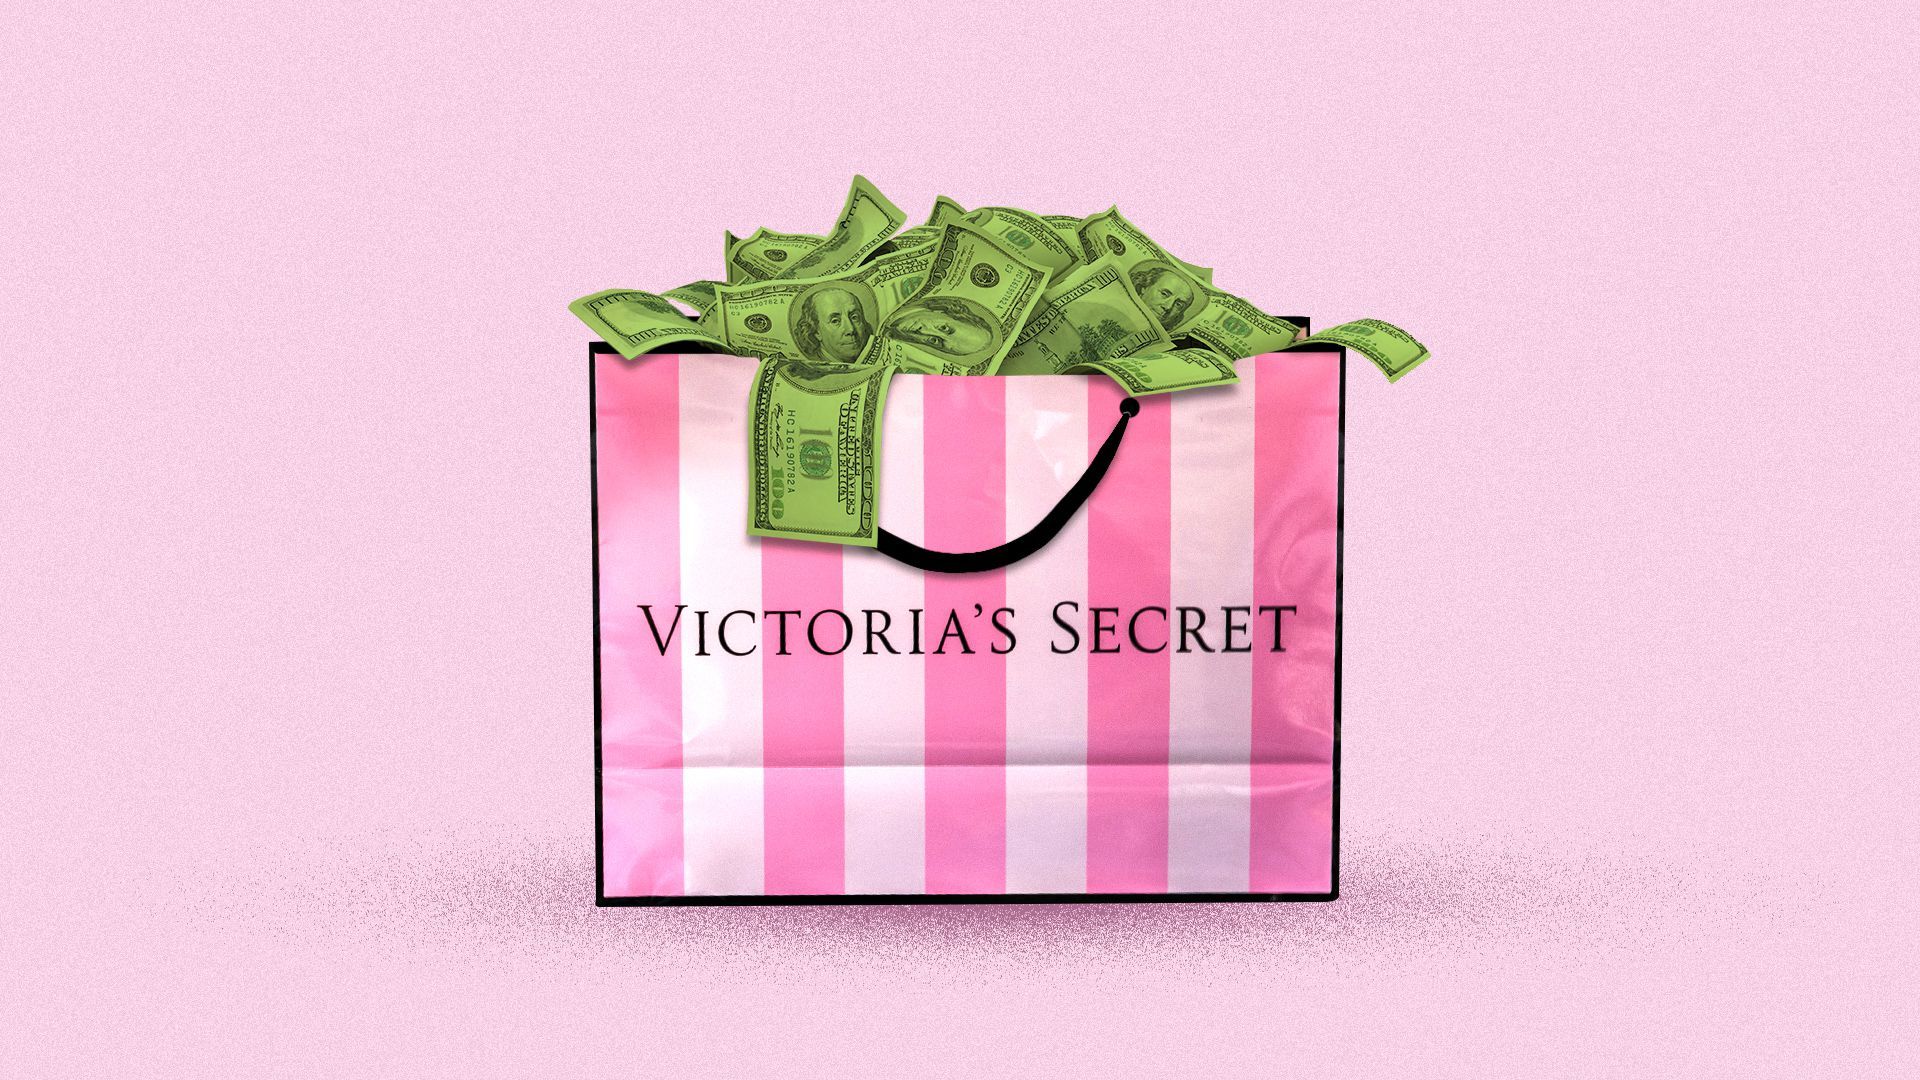 Victoria's Secret - All the boxes were filled with presents and